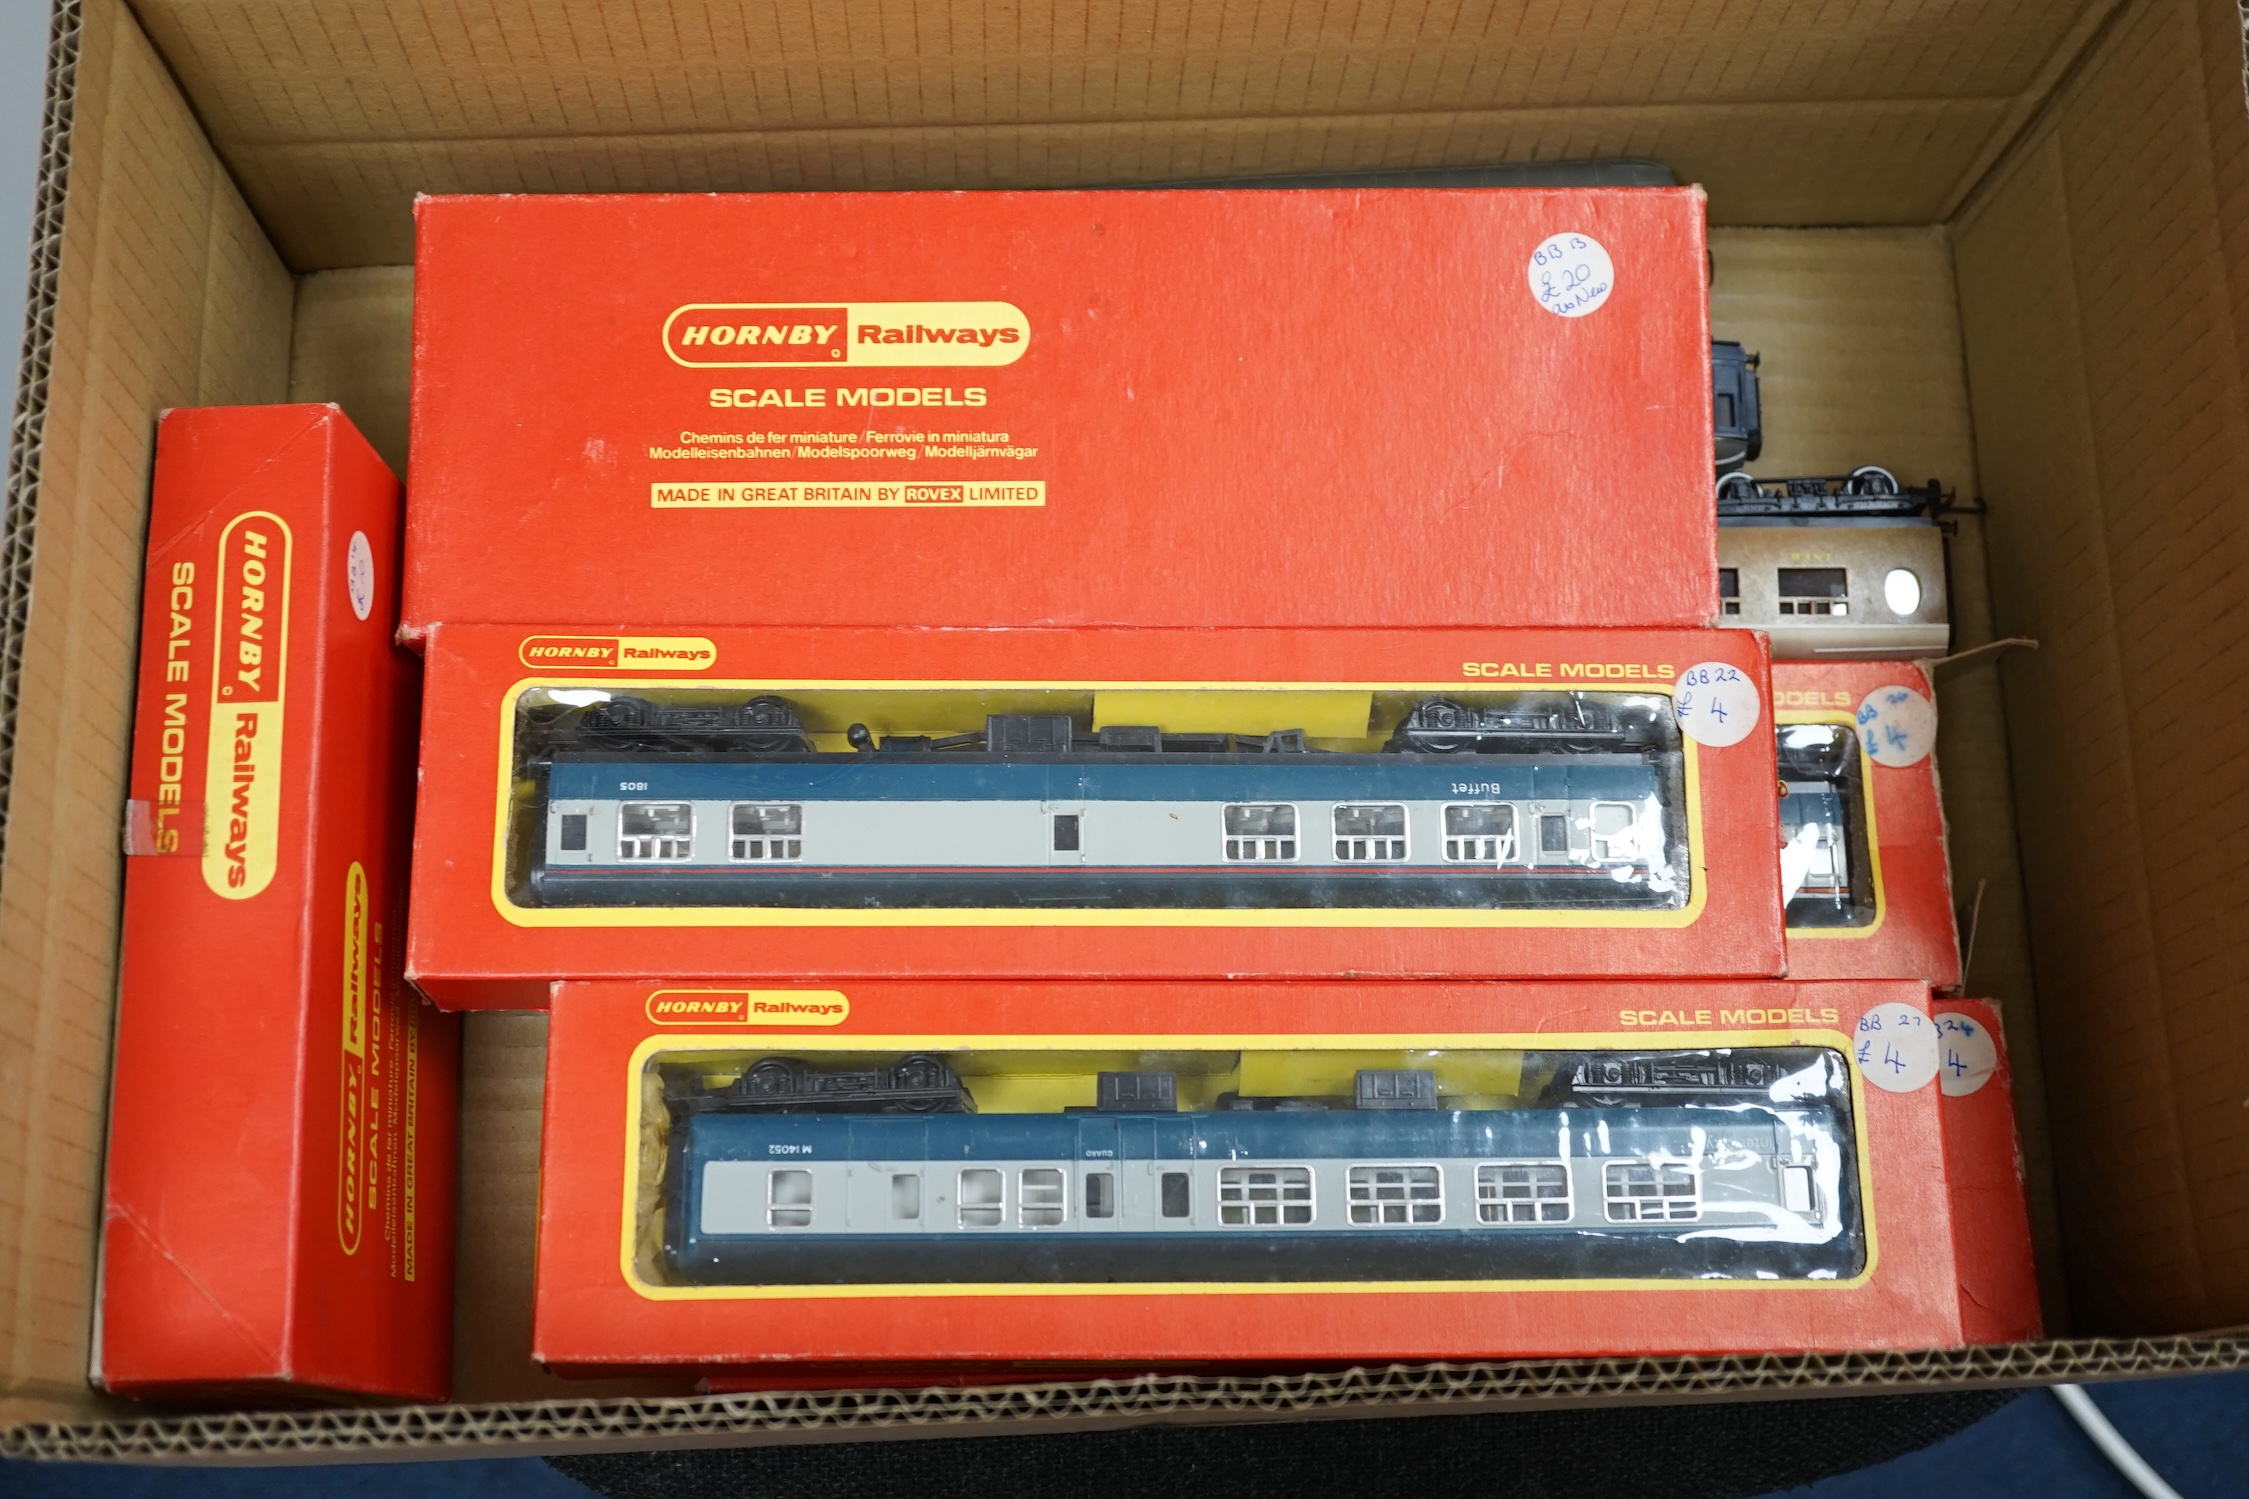 Fifteen 00 gauge model railway items by Hornby Railways, Lima, etc. including six locomotives; a BR Class 37 diesel locomotive, a Class 31 diesel locomotive, an 0-6-0T locomotive, etc. together with six Inter-city bogie